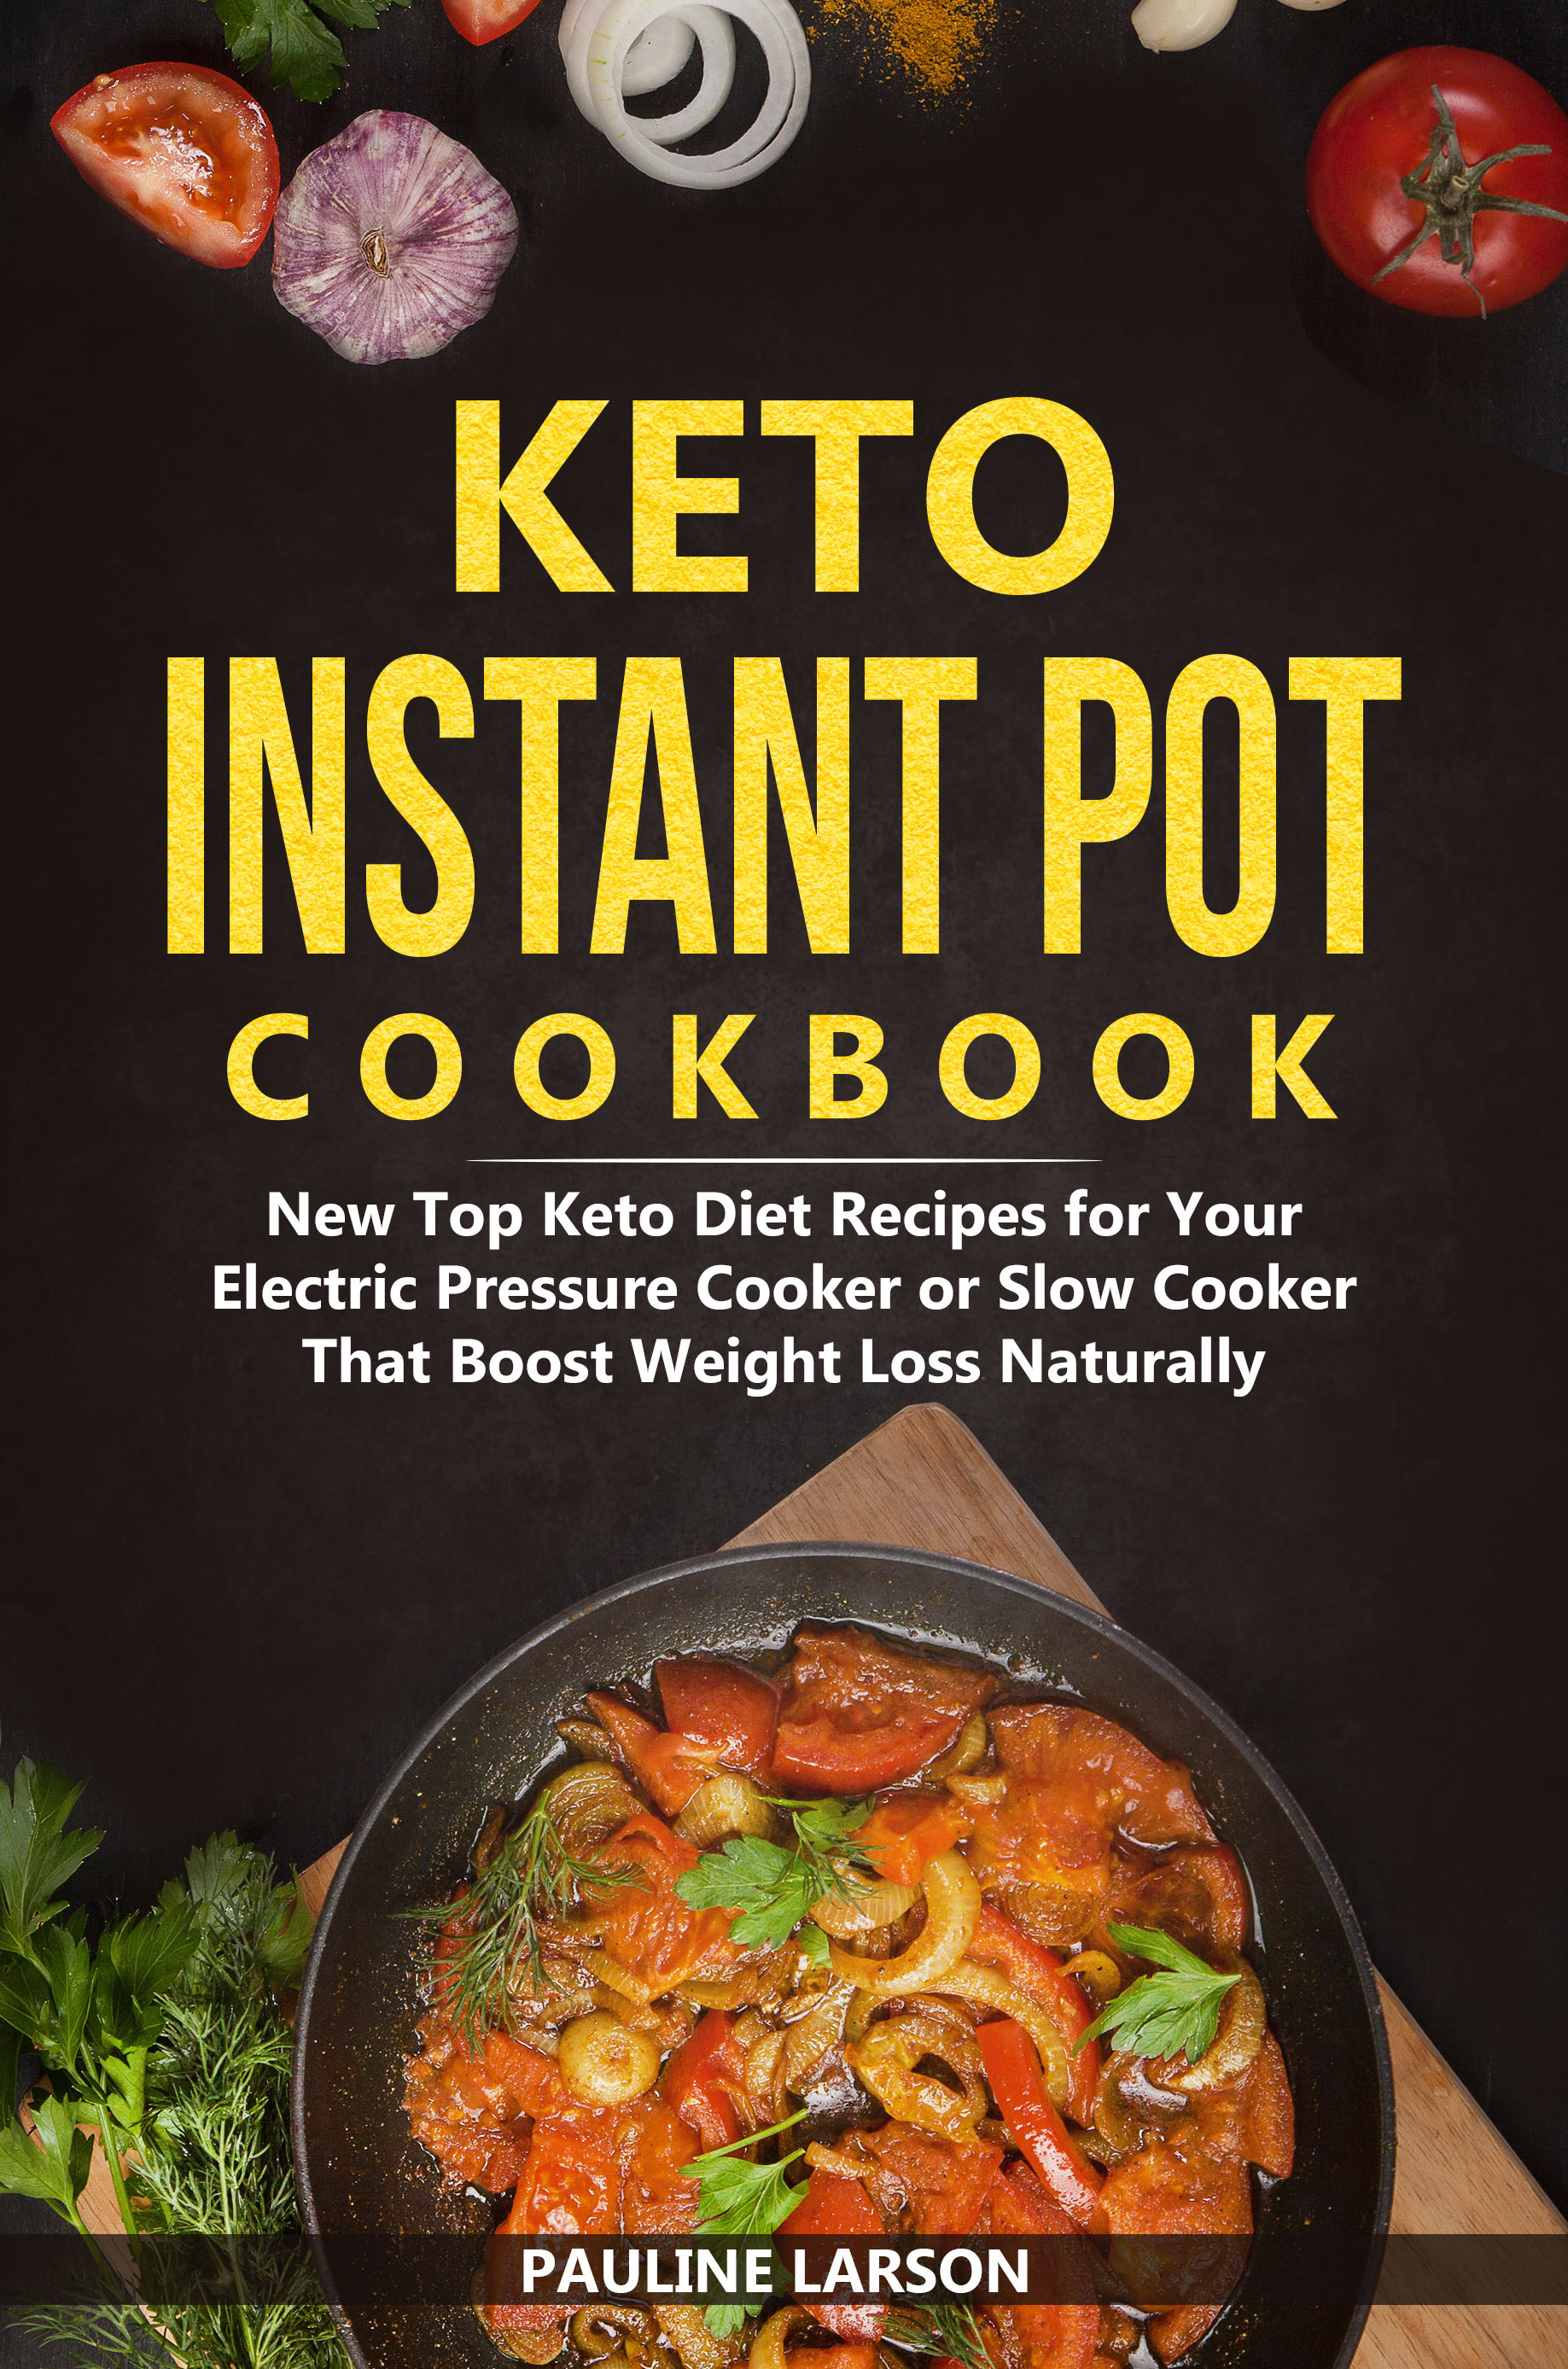 FREE: Keto Instant Pot Cookbook: New Top Keto Diet Recipes for Your Electric Pressure Cooker or Slow Cooker That Boost Weight Loss Naturally by Pauline Larson